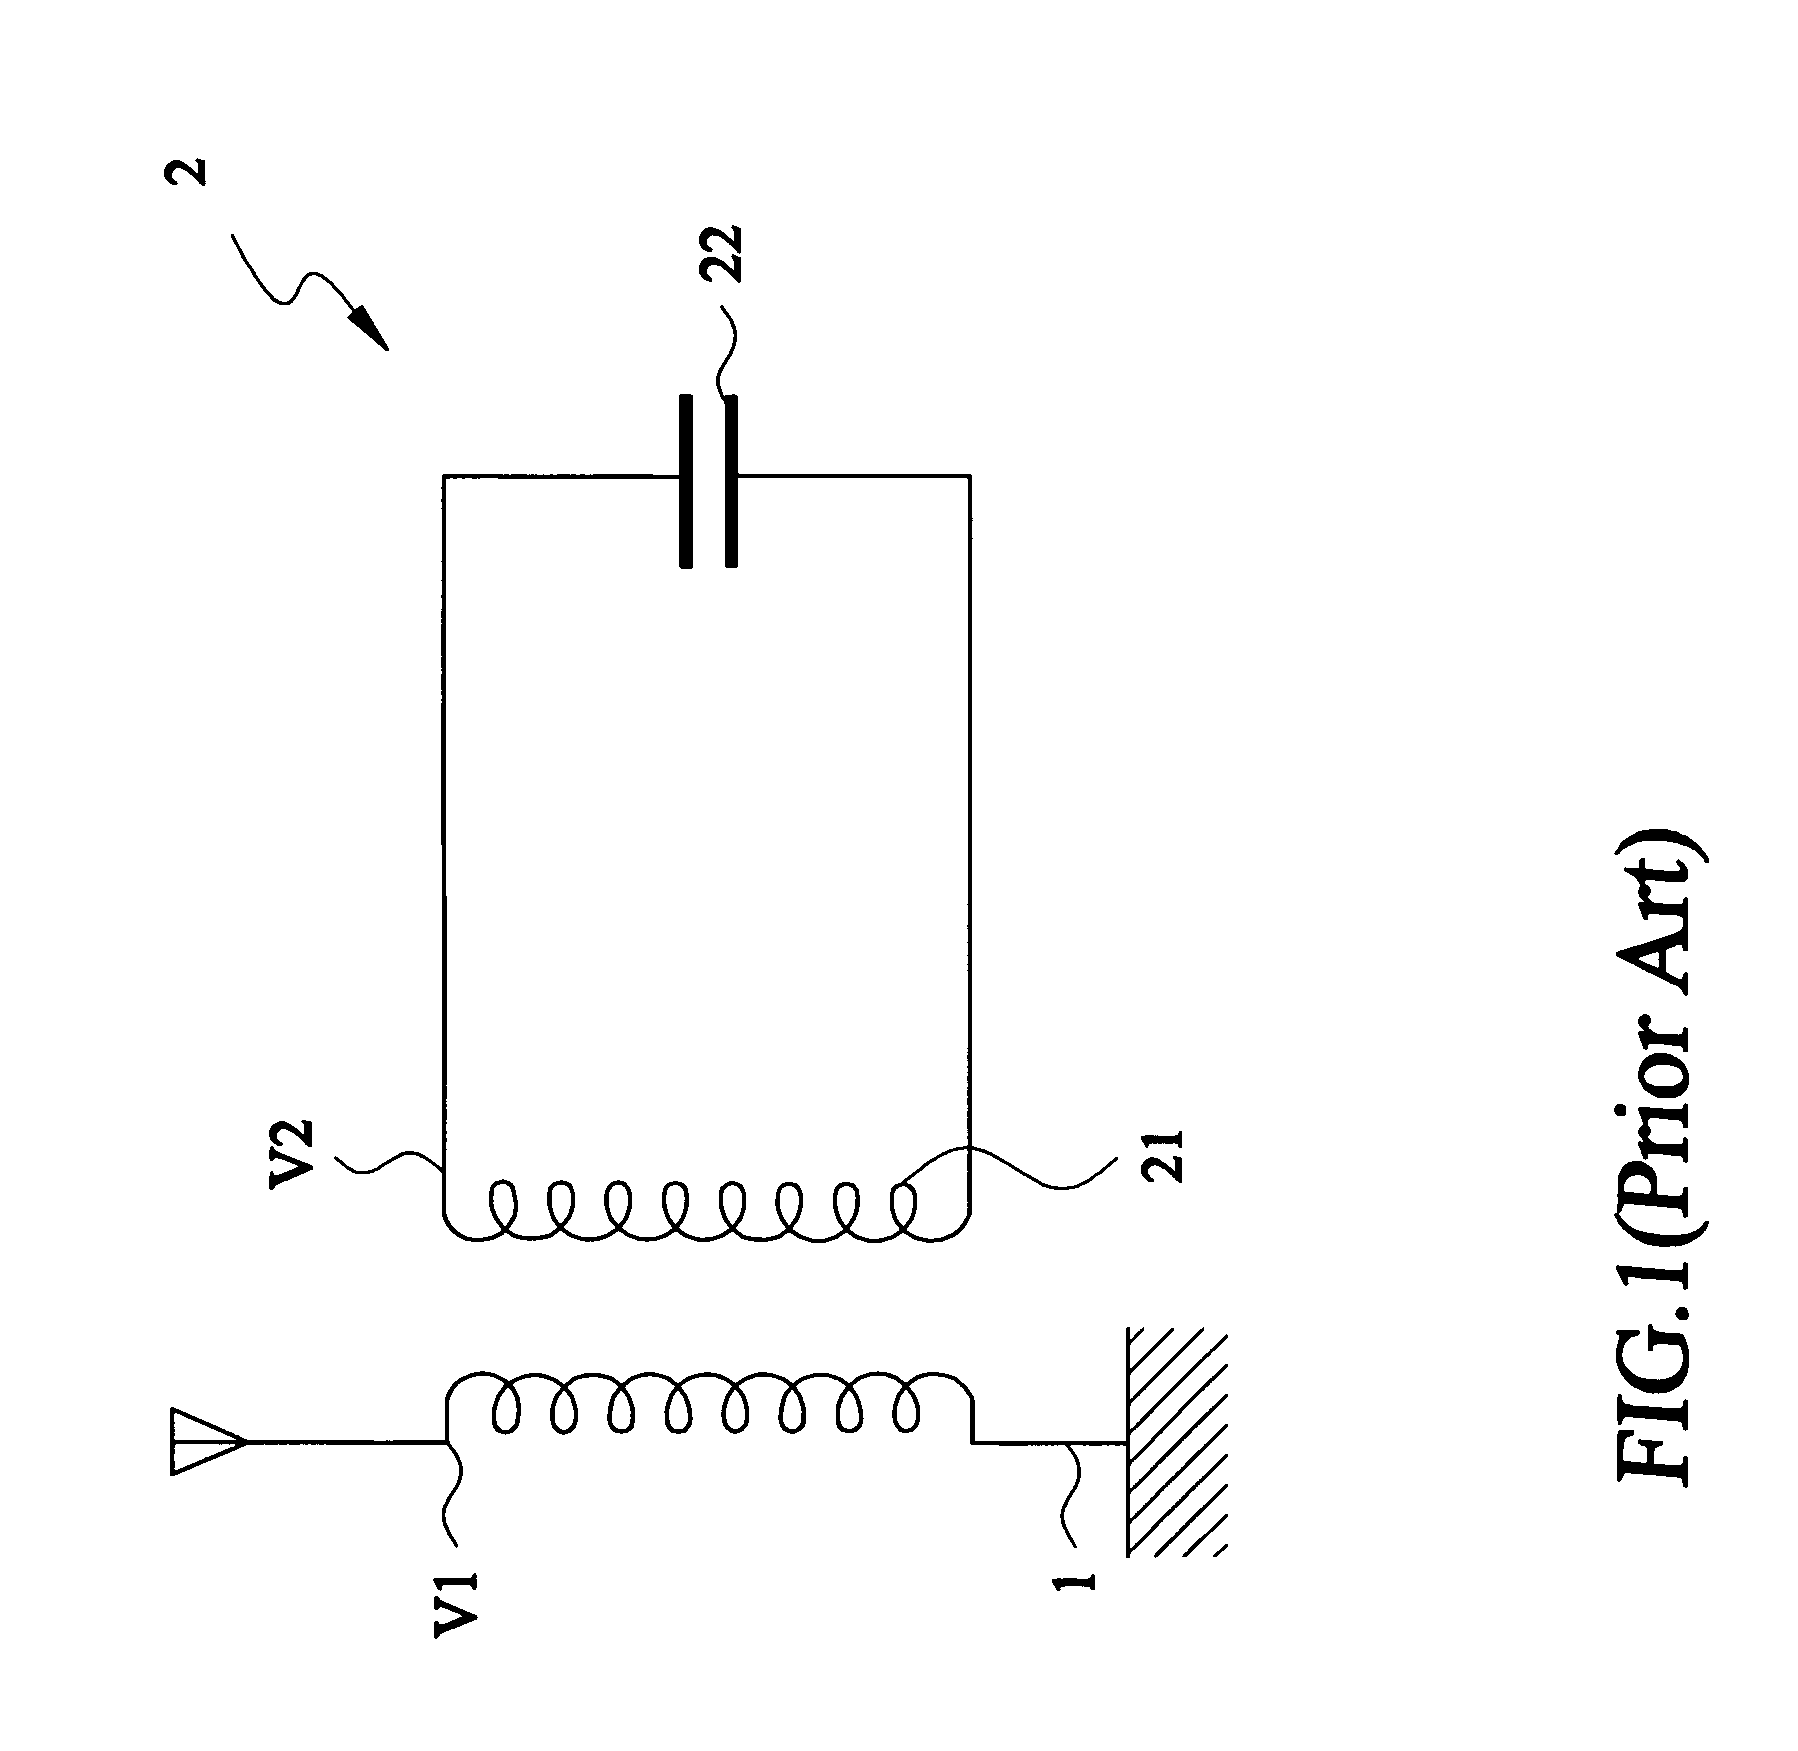 Antenna device with ion-implanted resonant pattern